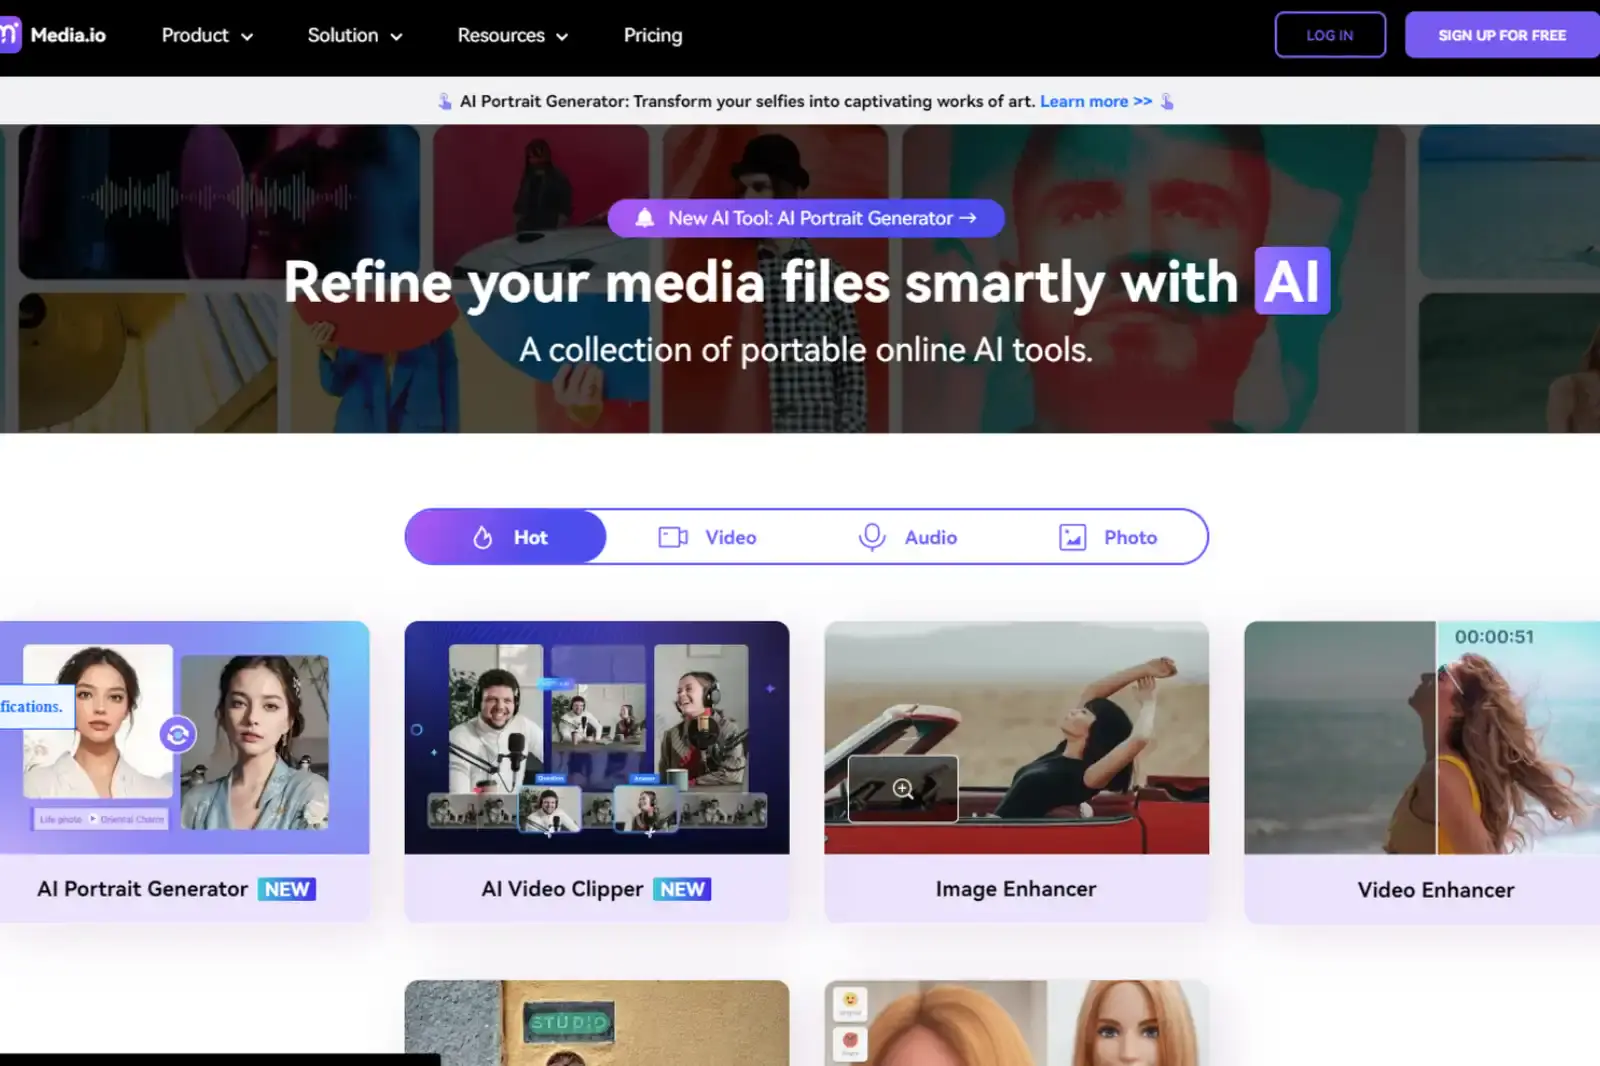 Home Page of Media.io